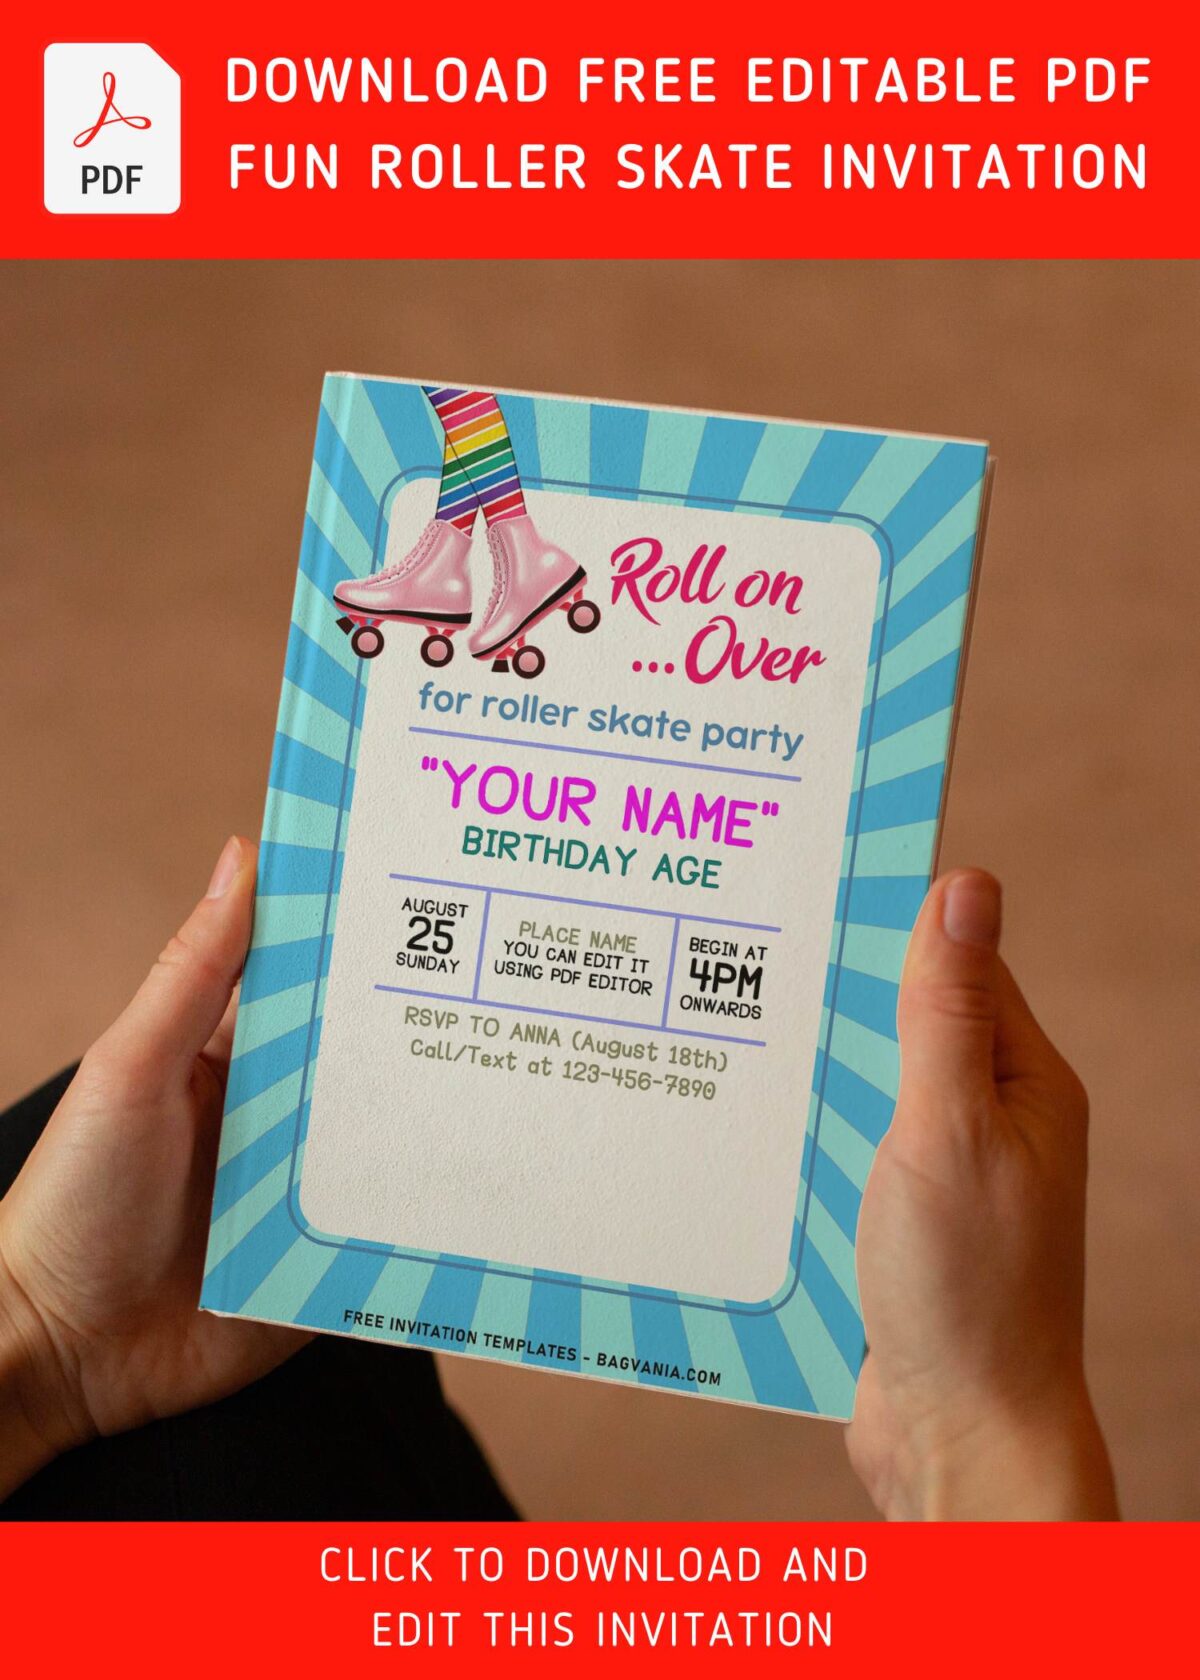 (Free Editable PDF) Cute Pastel Neon Roller Skating Birthday Invitation Templates with cute and catchy wordings